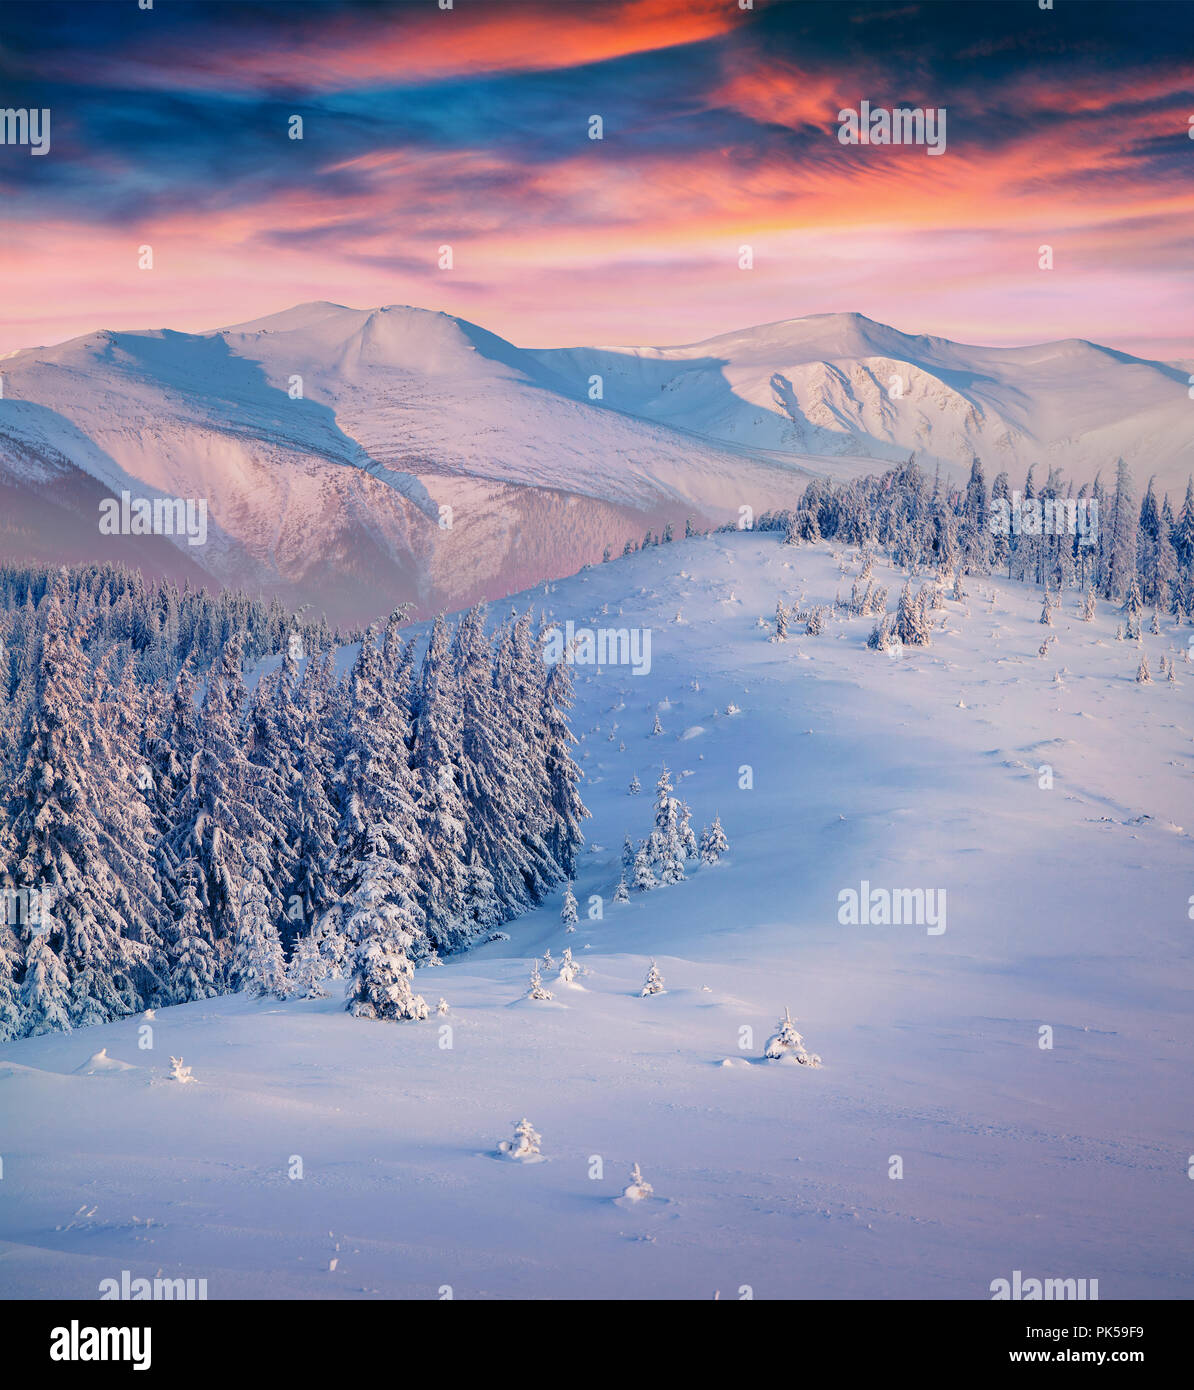 Colorful winter sunrise in the mountains. Happy New Year! Stock Photo